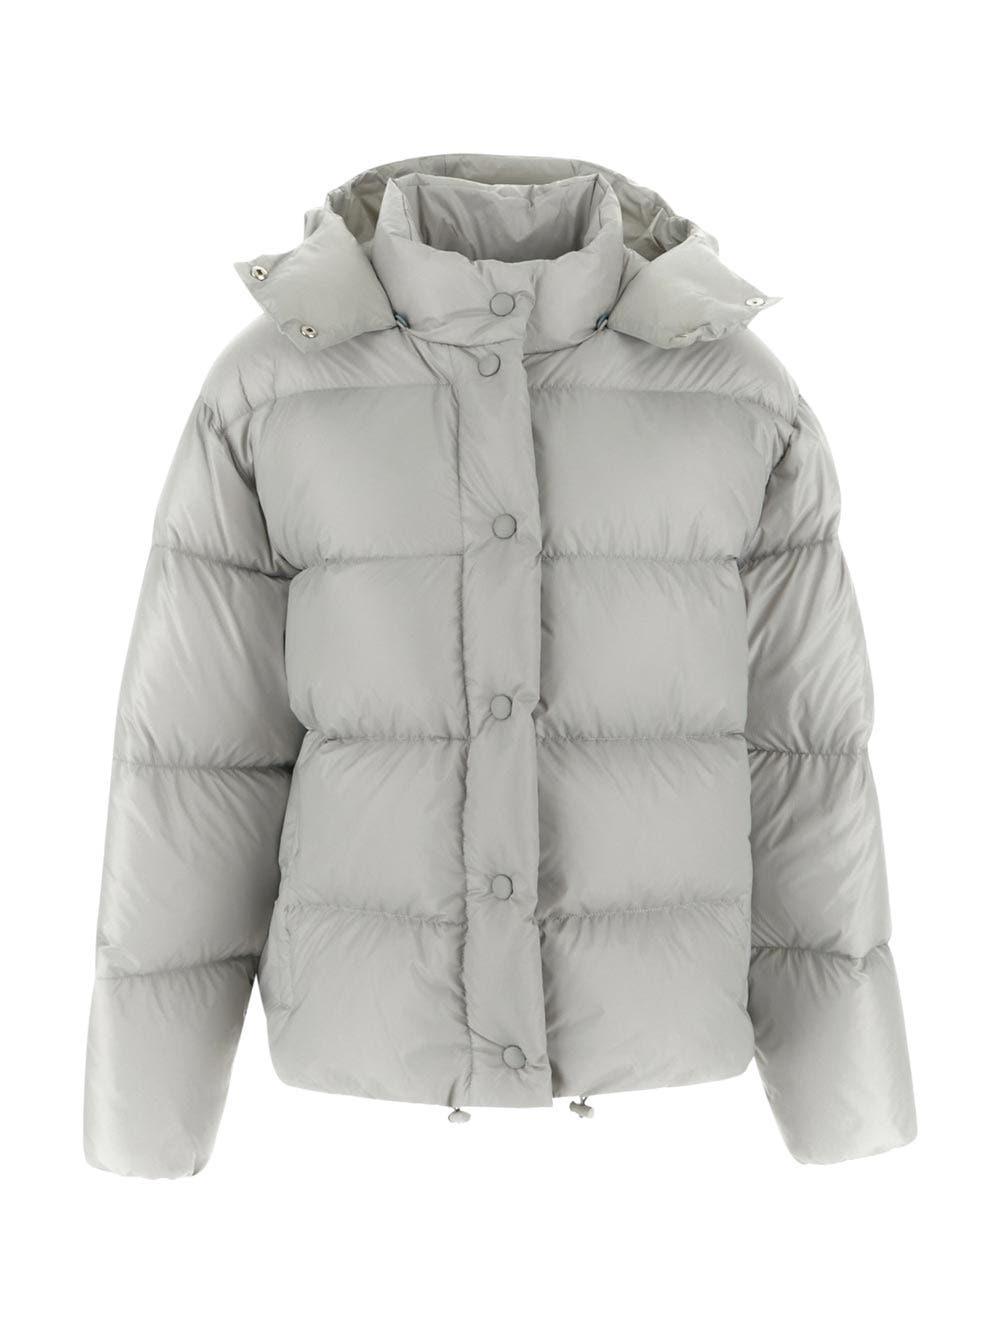 Miu Miu Quilted Down Jacket in Gray | Lyst